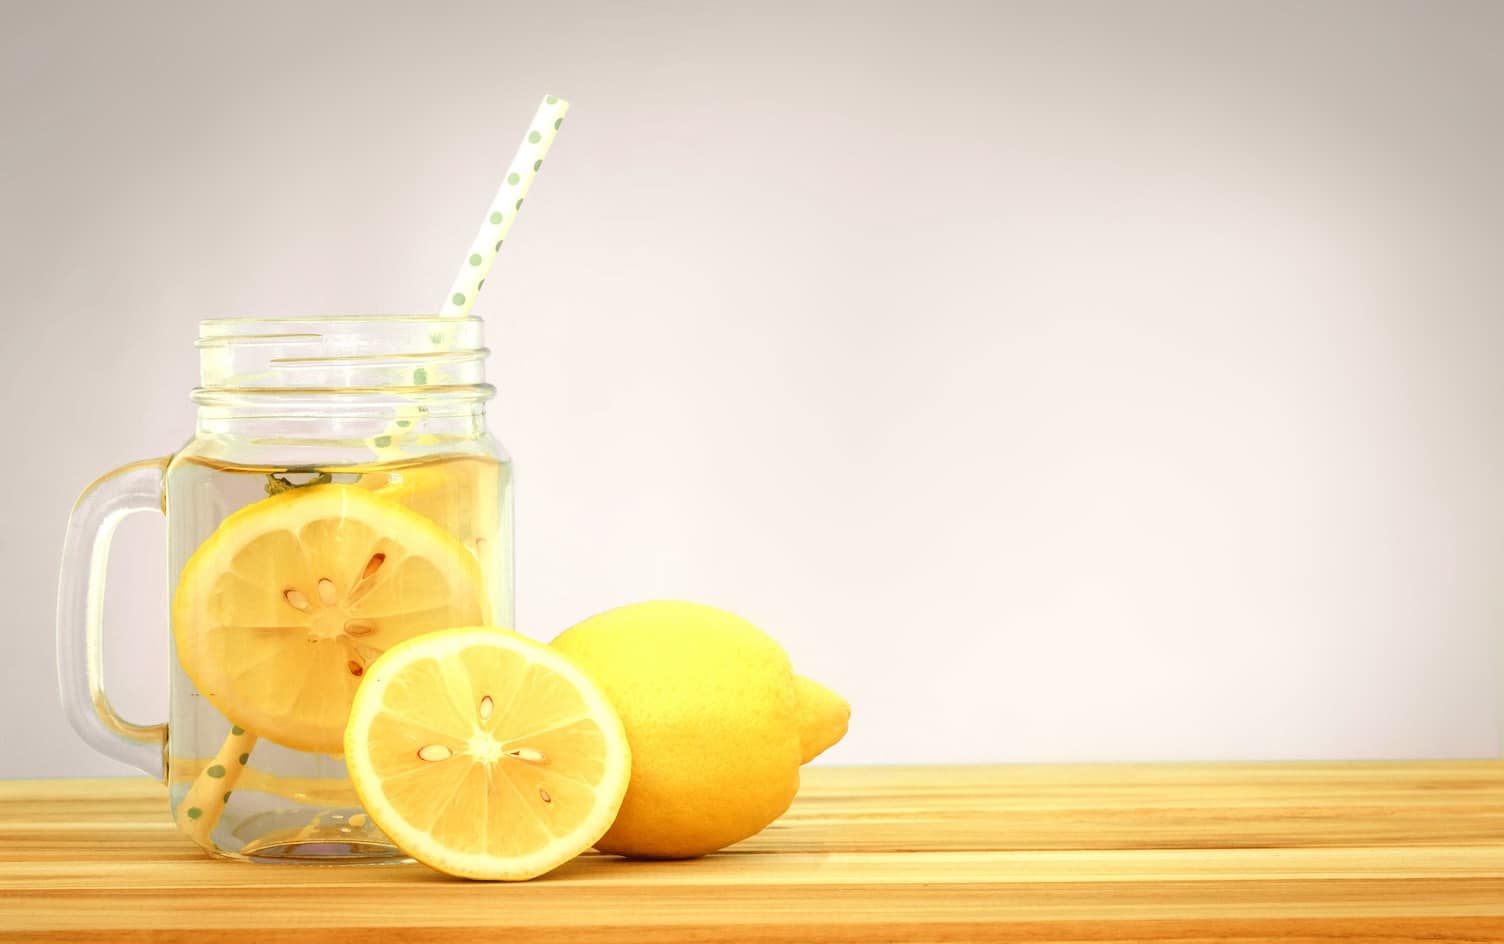 Lemon Water Is Great But Not a Weight Loss Hack, Says Expert